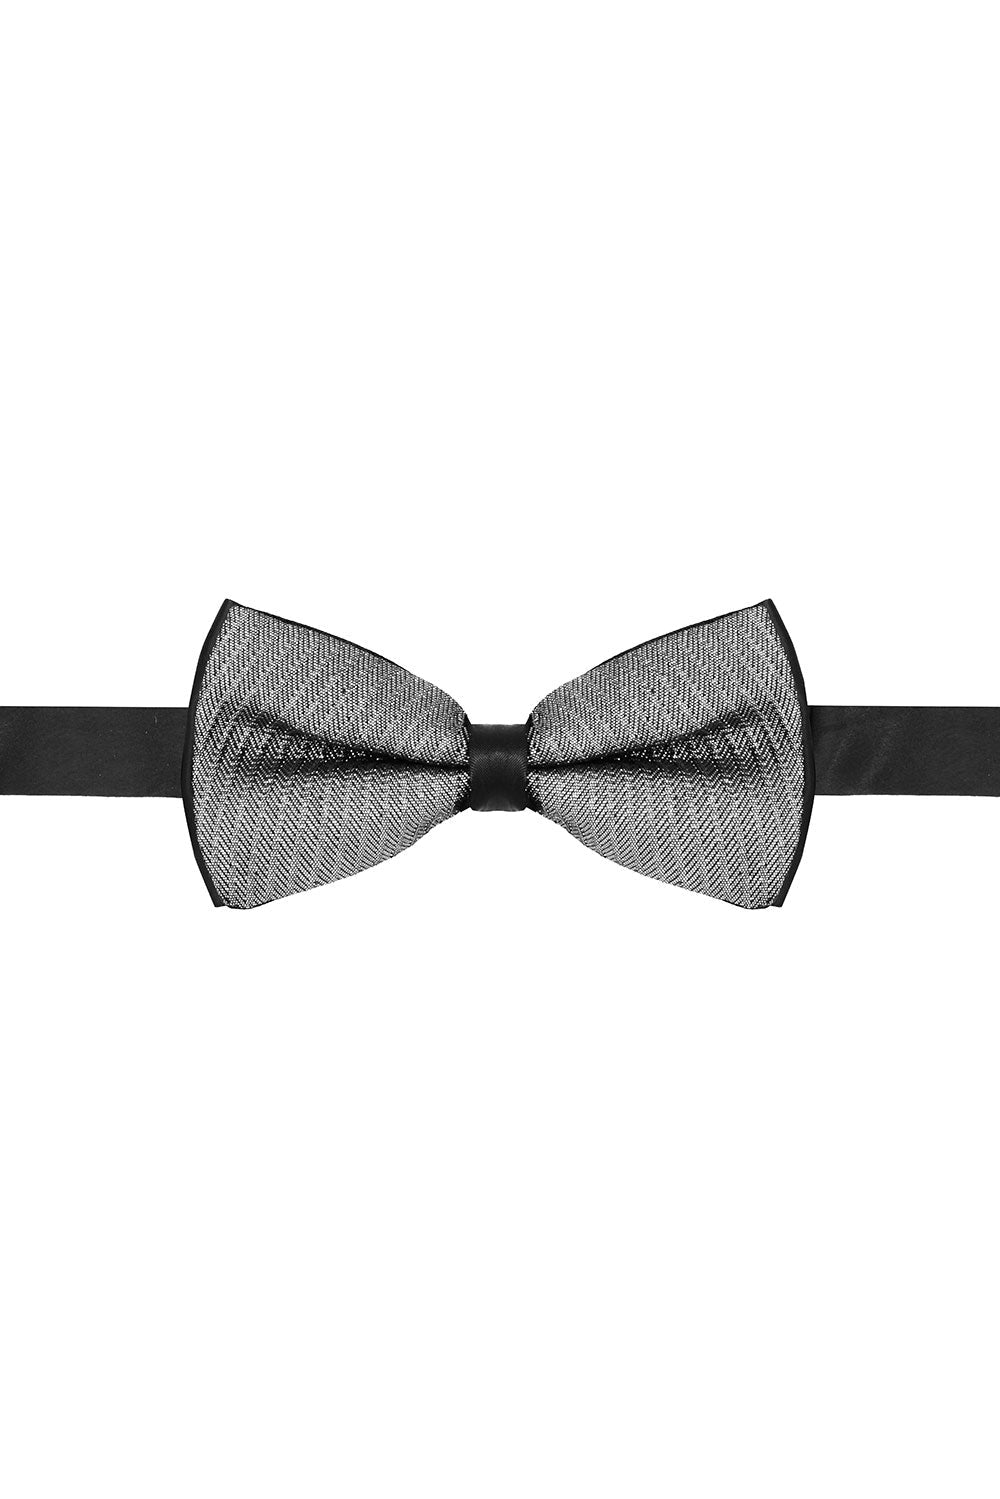 Barabas Men's Textured Material Bow Tie 2BW3105 Silver